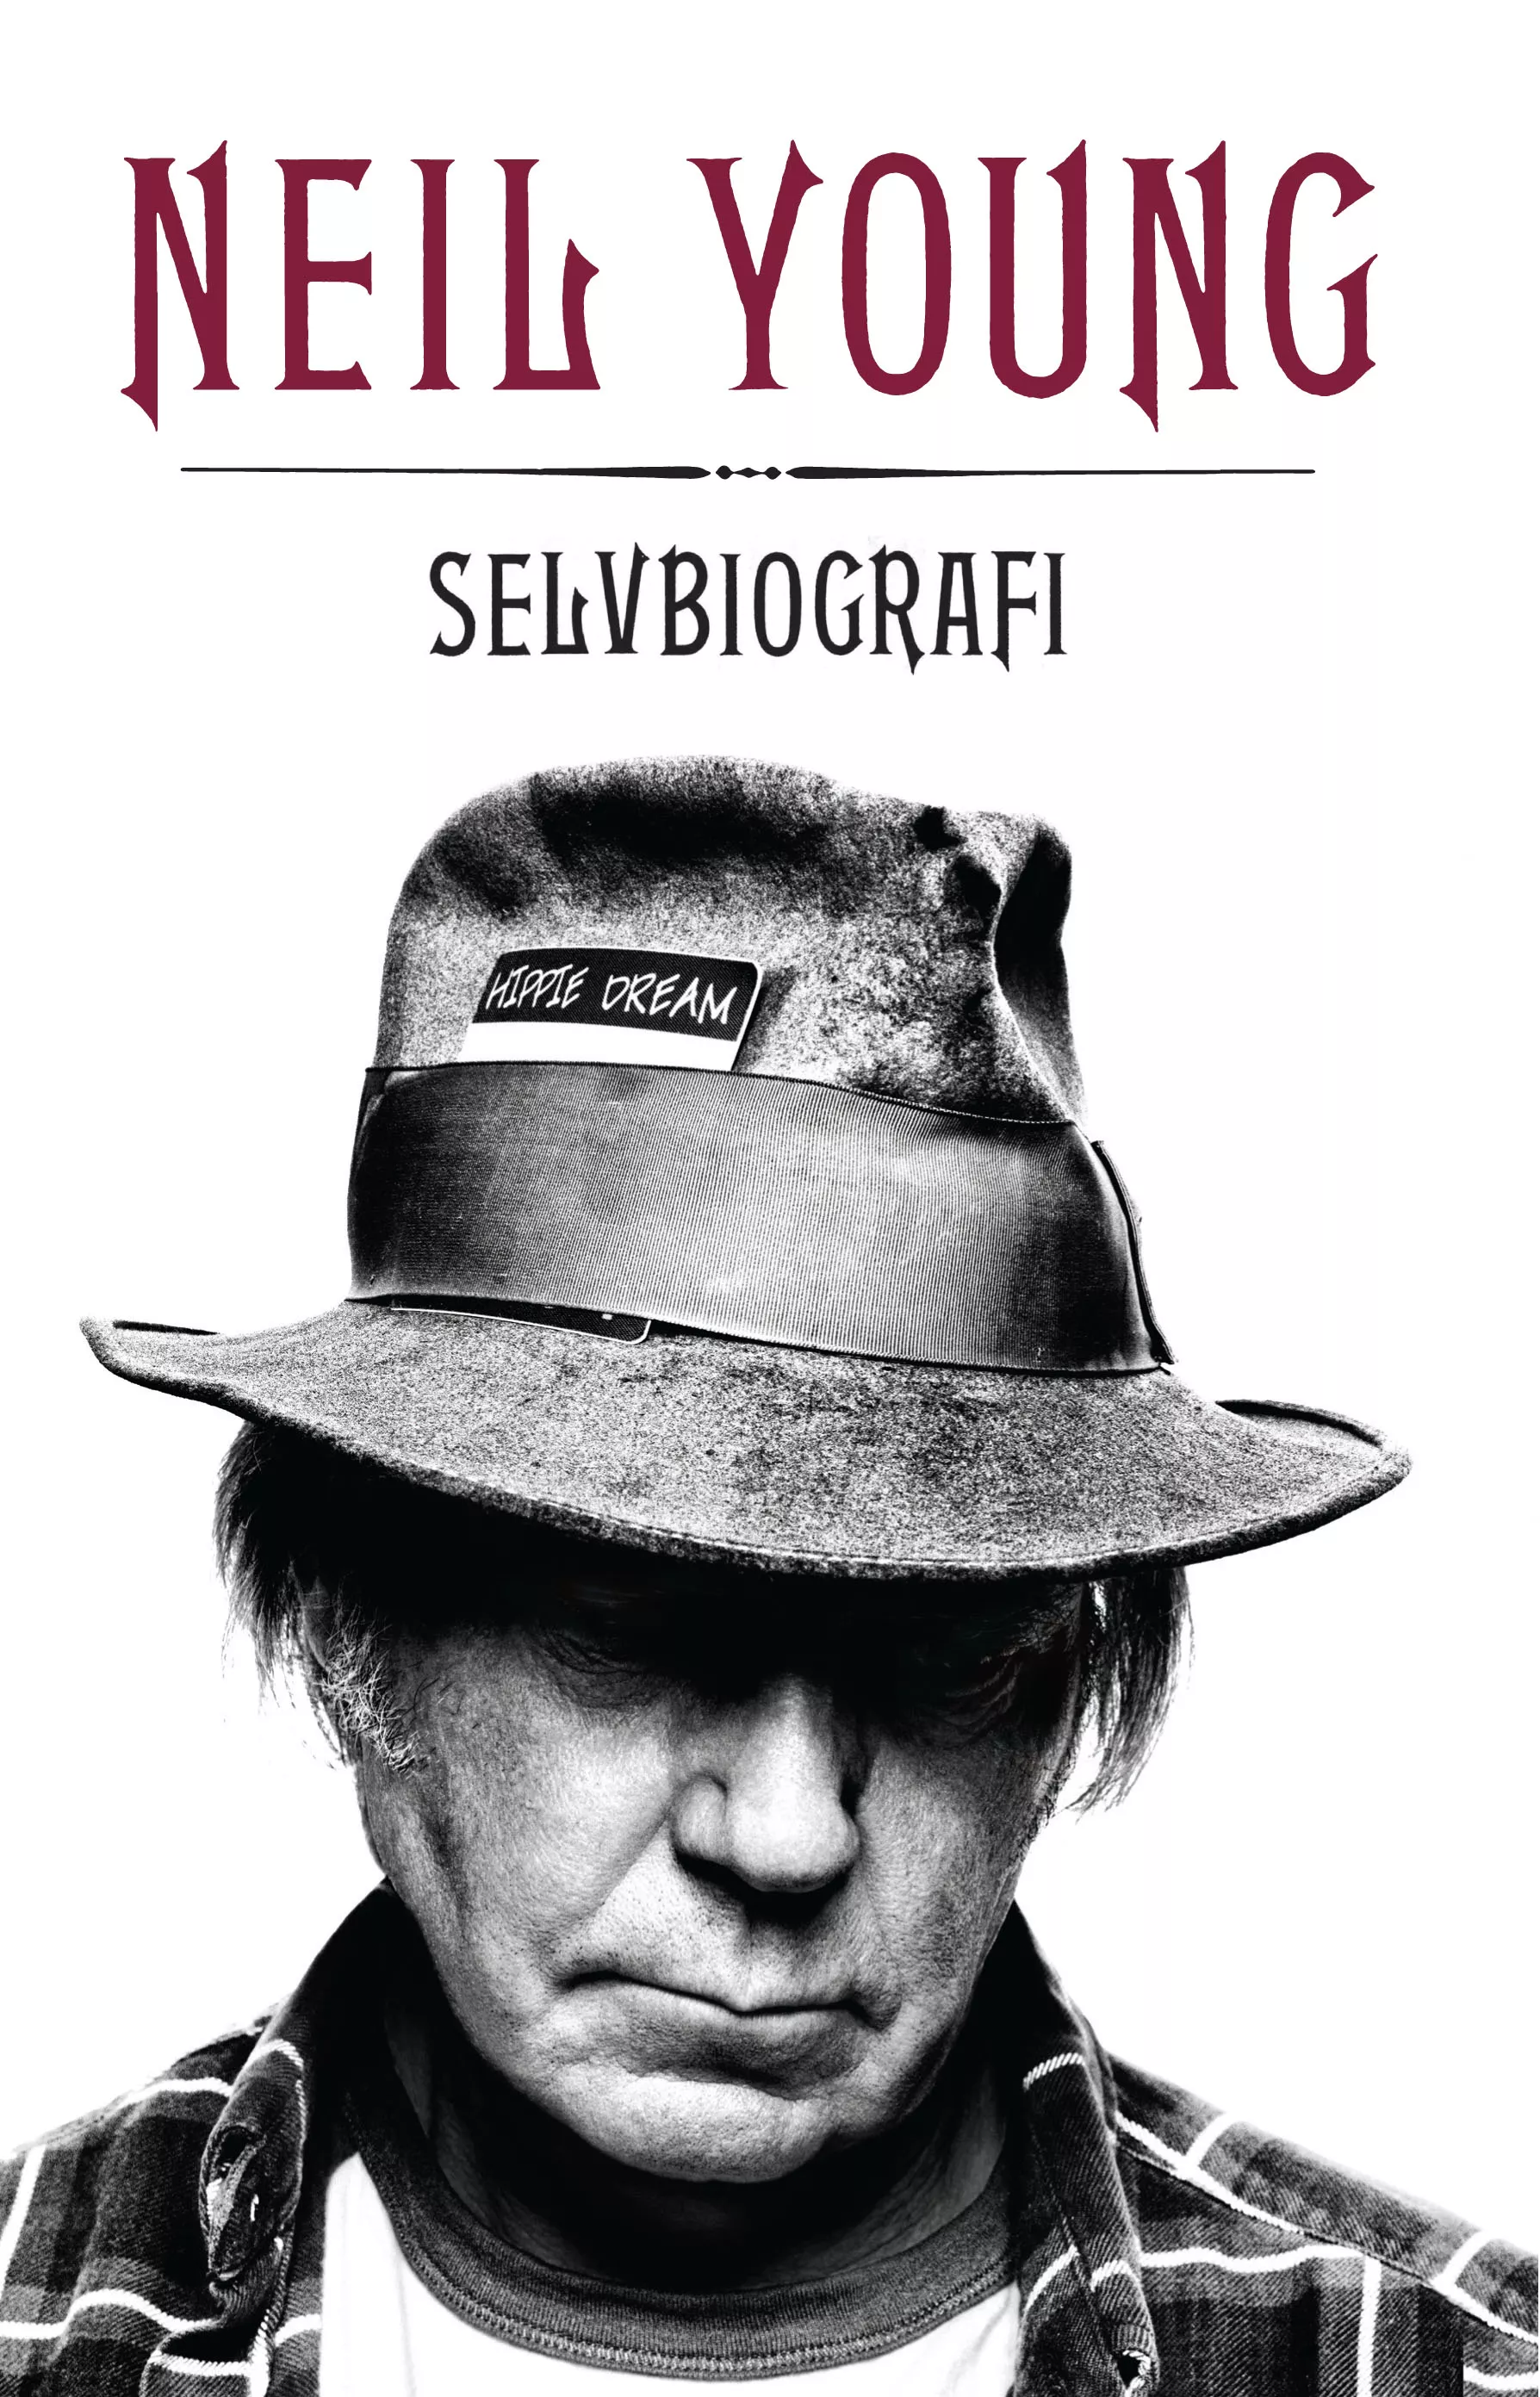 Neil Young vil skilles 